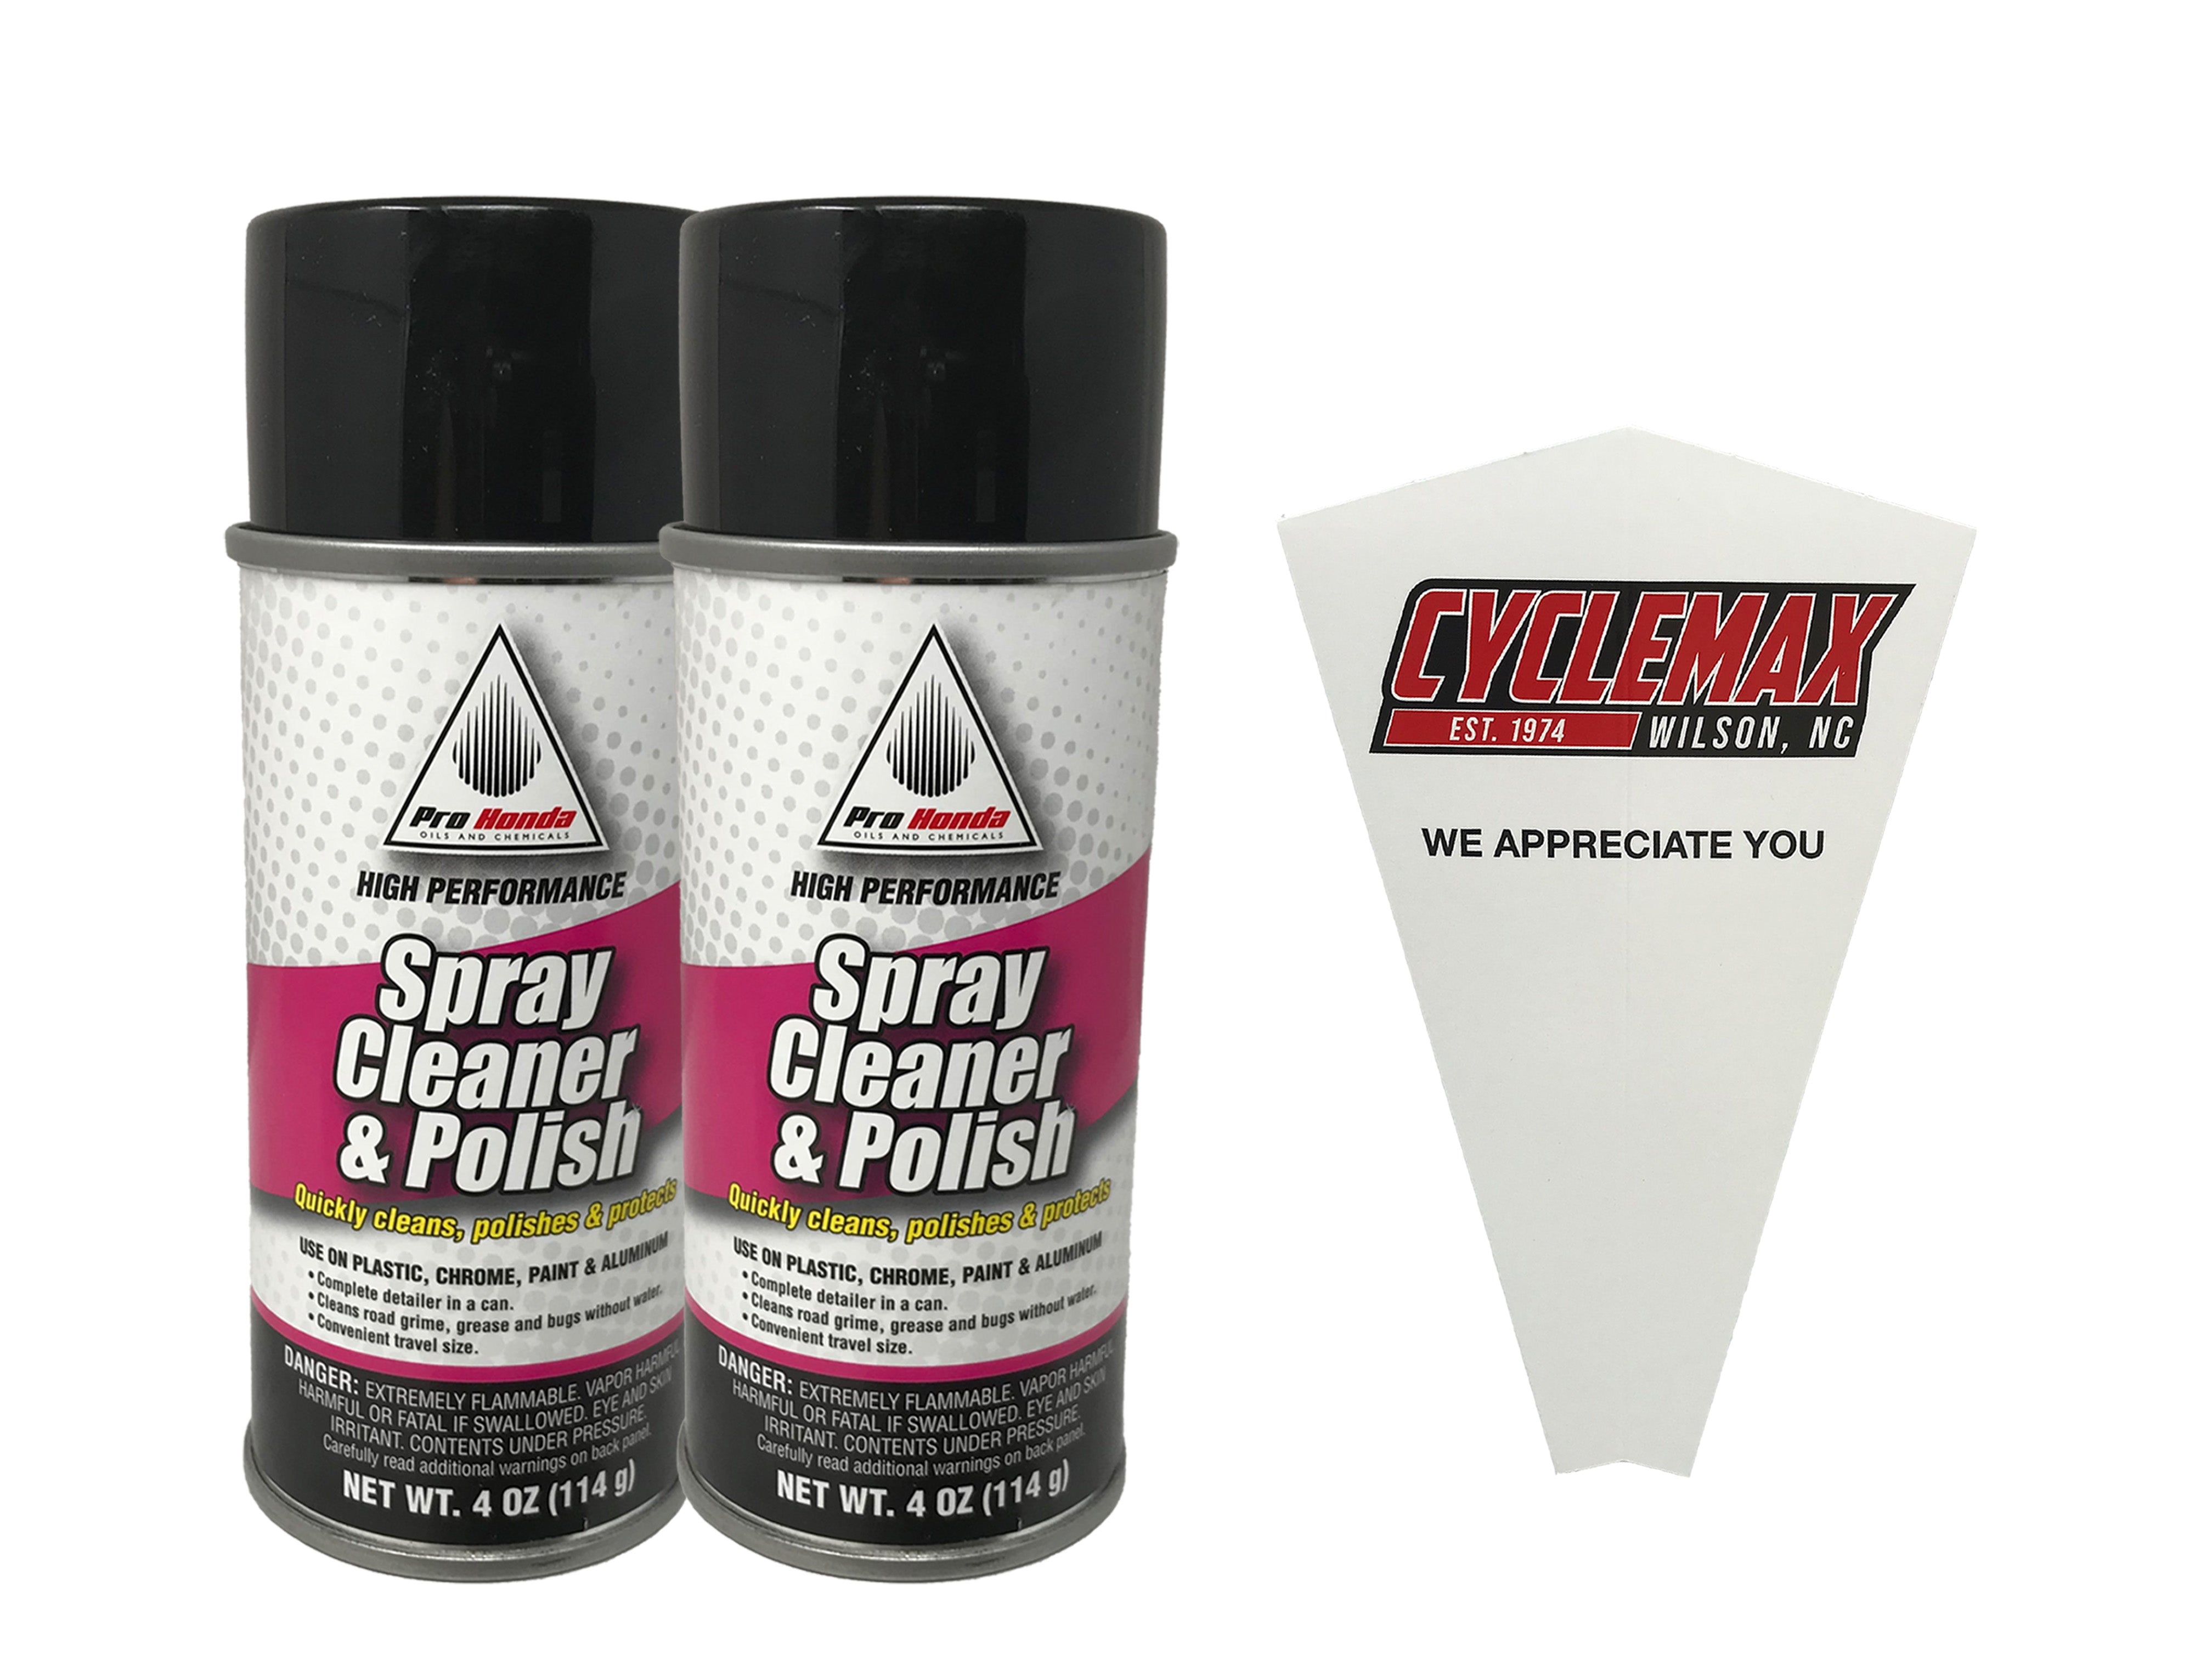 CYCLEMAX Two Pack for Honda Pro Honda Spray Cleaner and Polish 08732-SCPSM Contains Two 4oz Cans and a Funnel